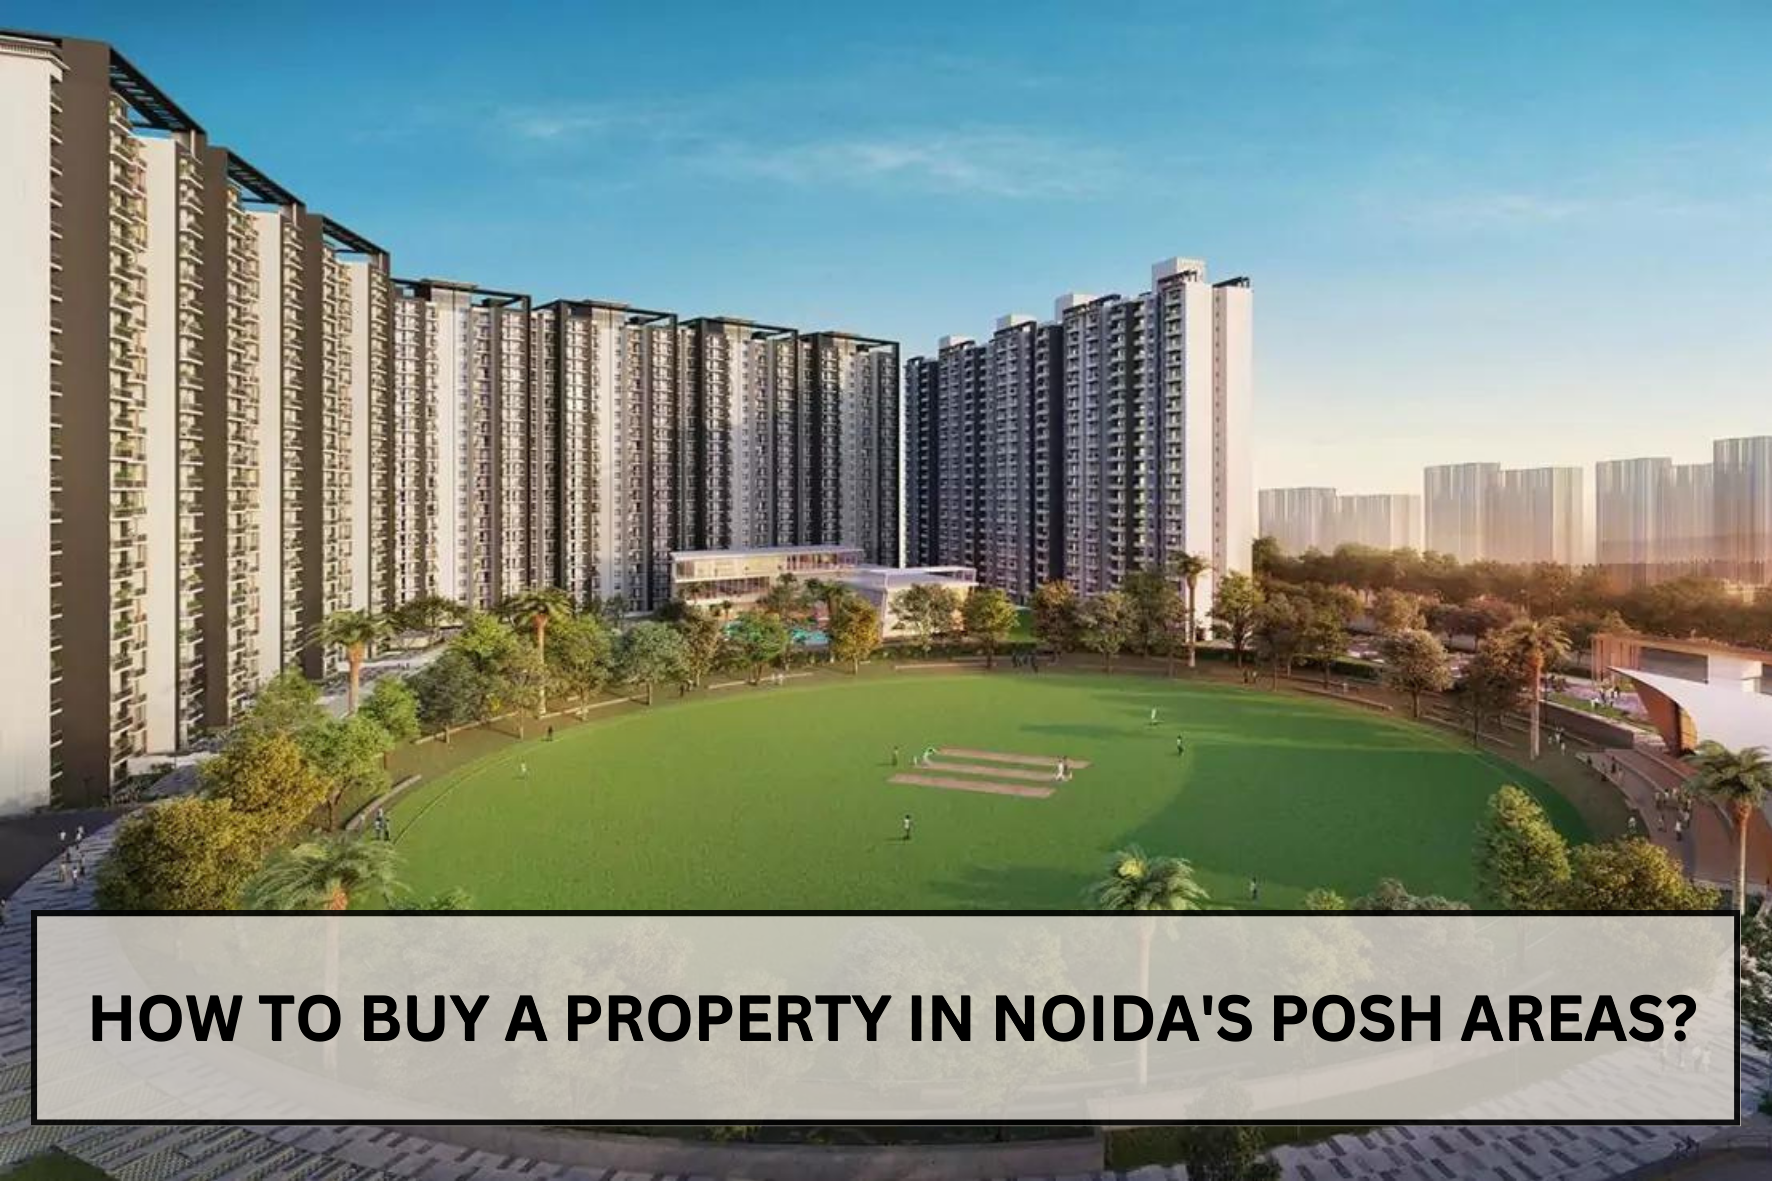 uploads/blog/How_to_buy_a_property_in_Noida_posh_areas.png